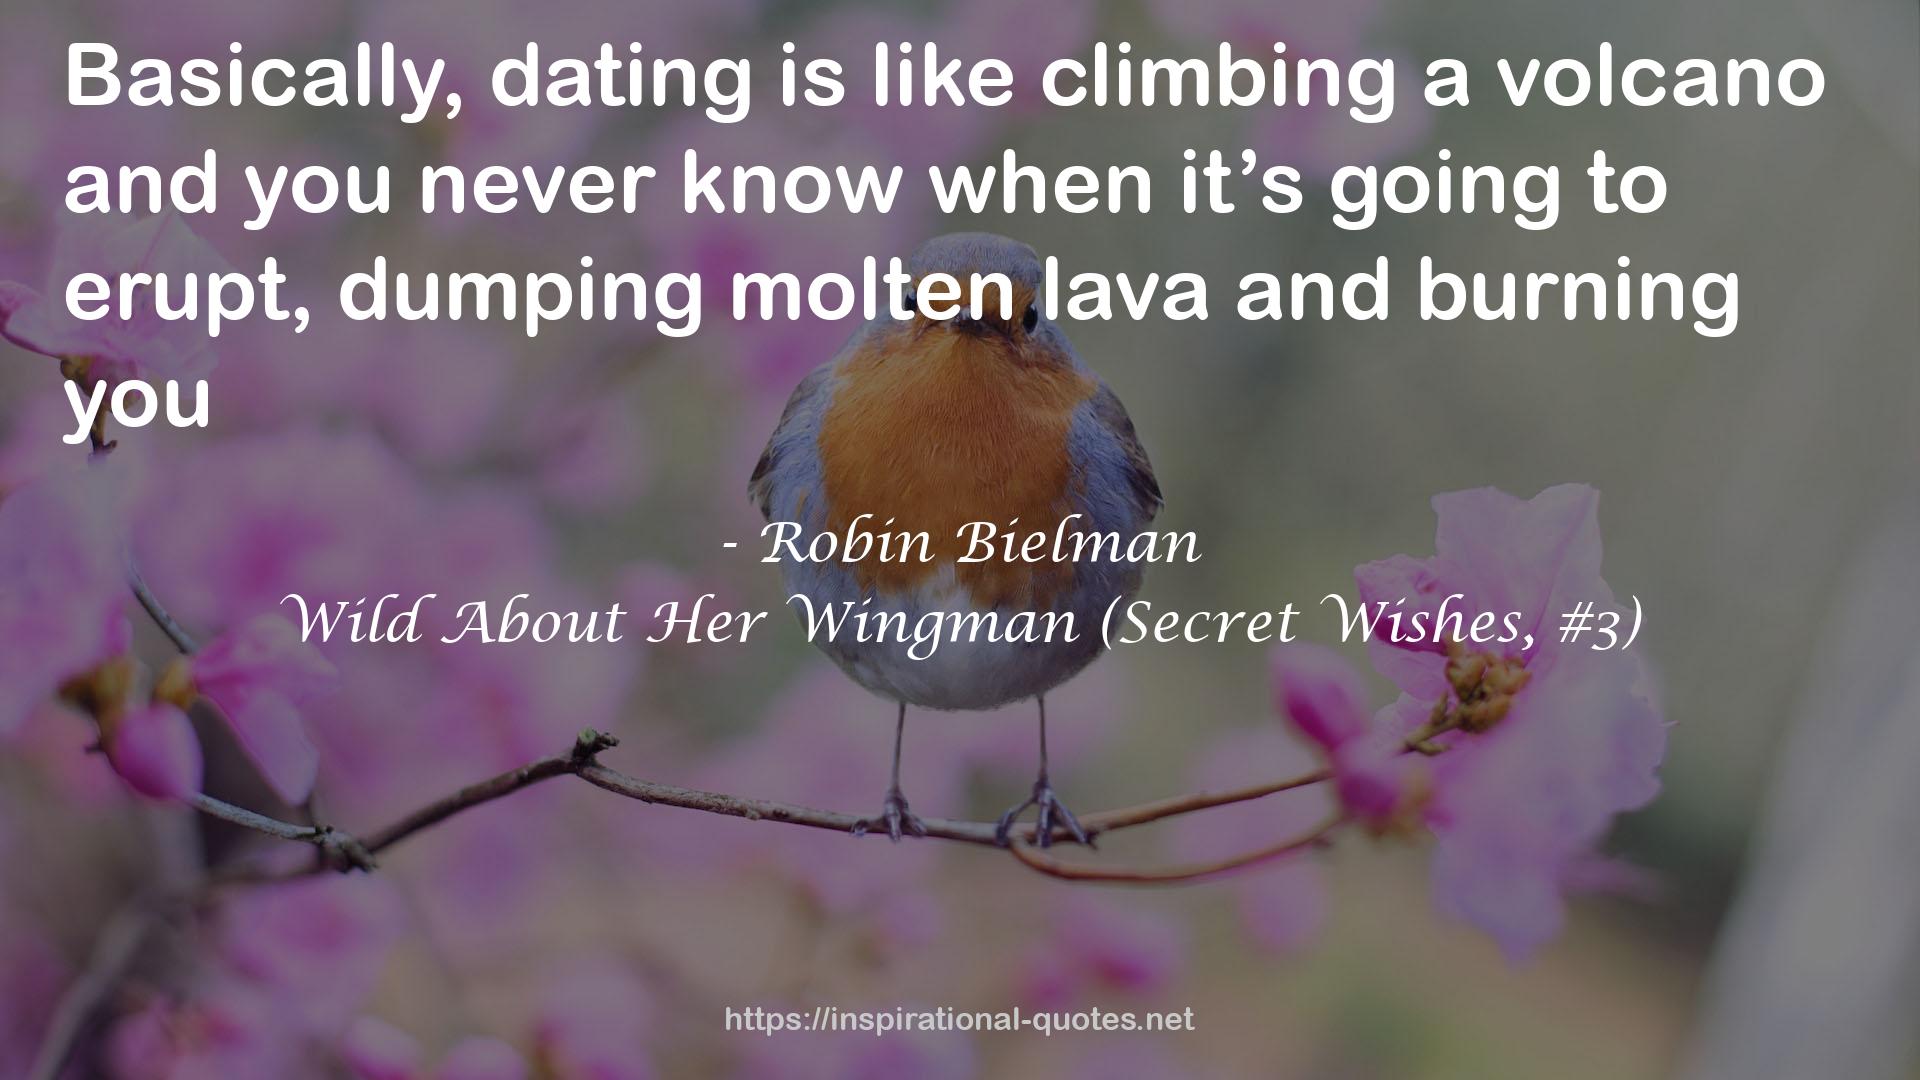 Wild About Her Wingman (Secret Wishes, #3) QUOTES